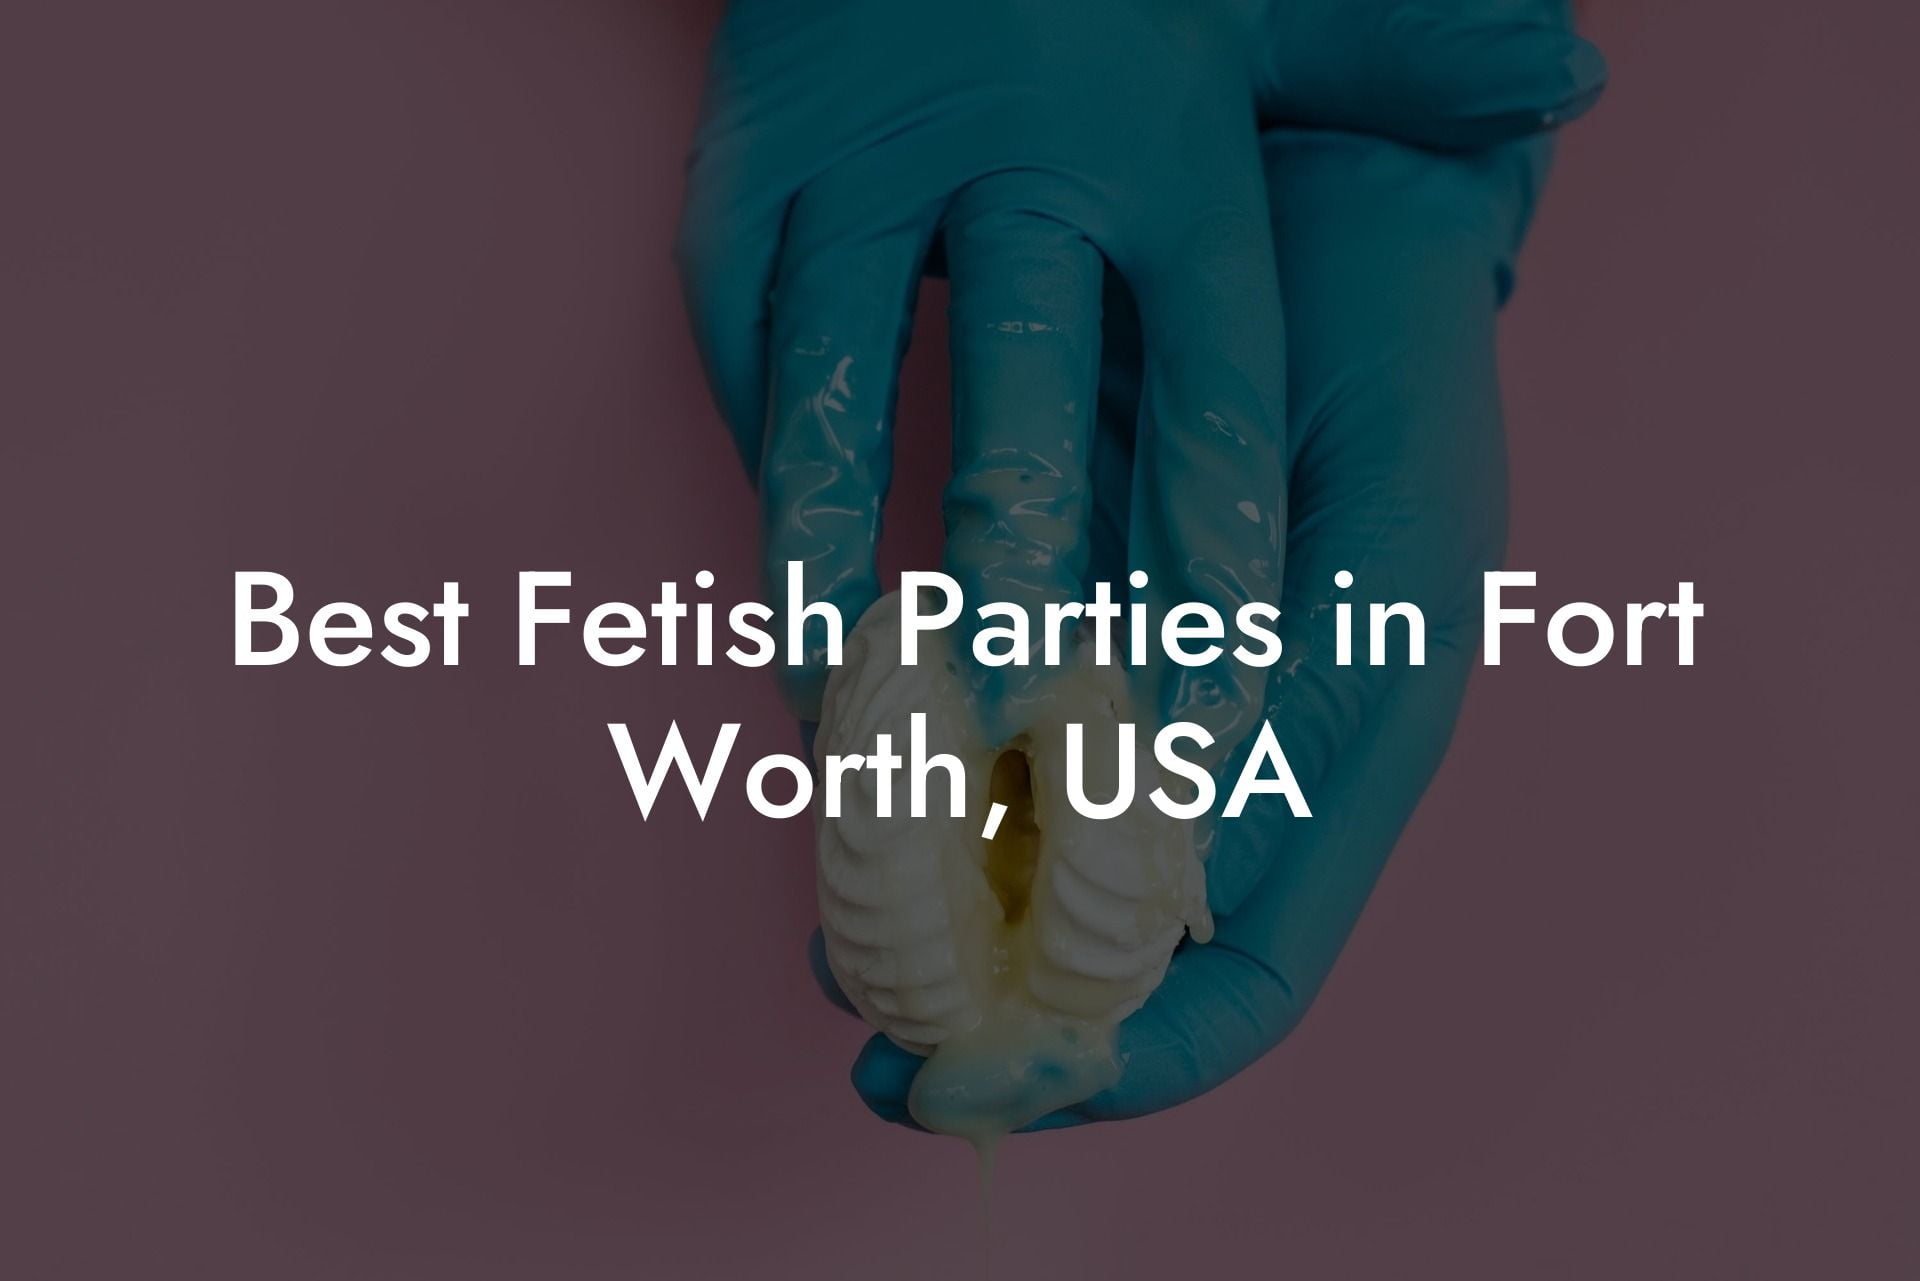 Best Fetish Parties in Fort Worth, USA